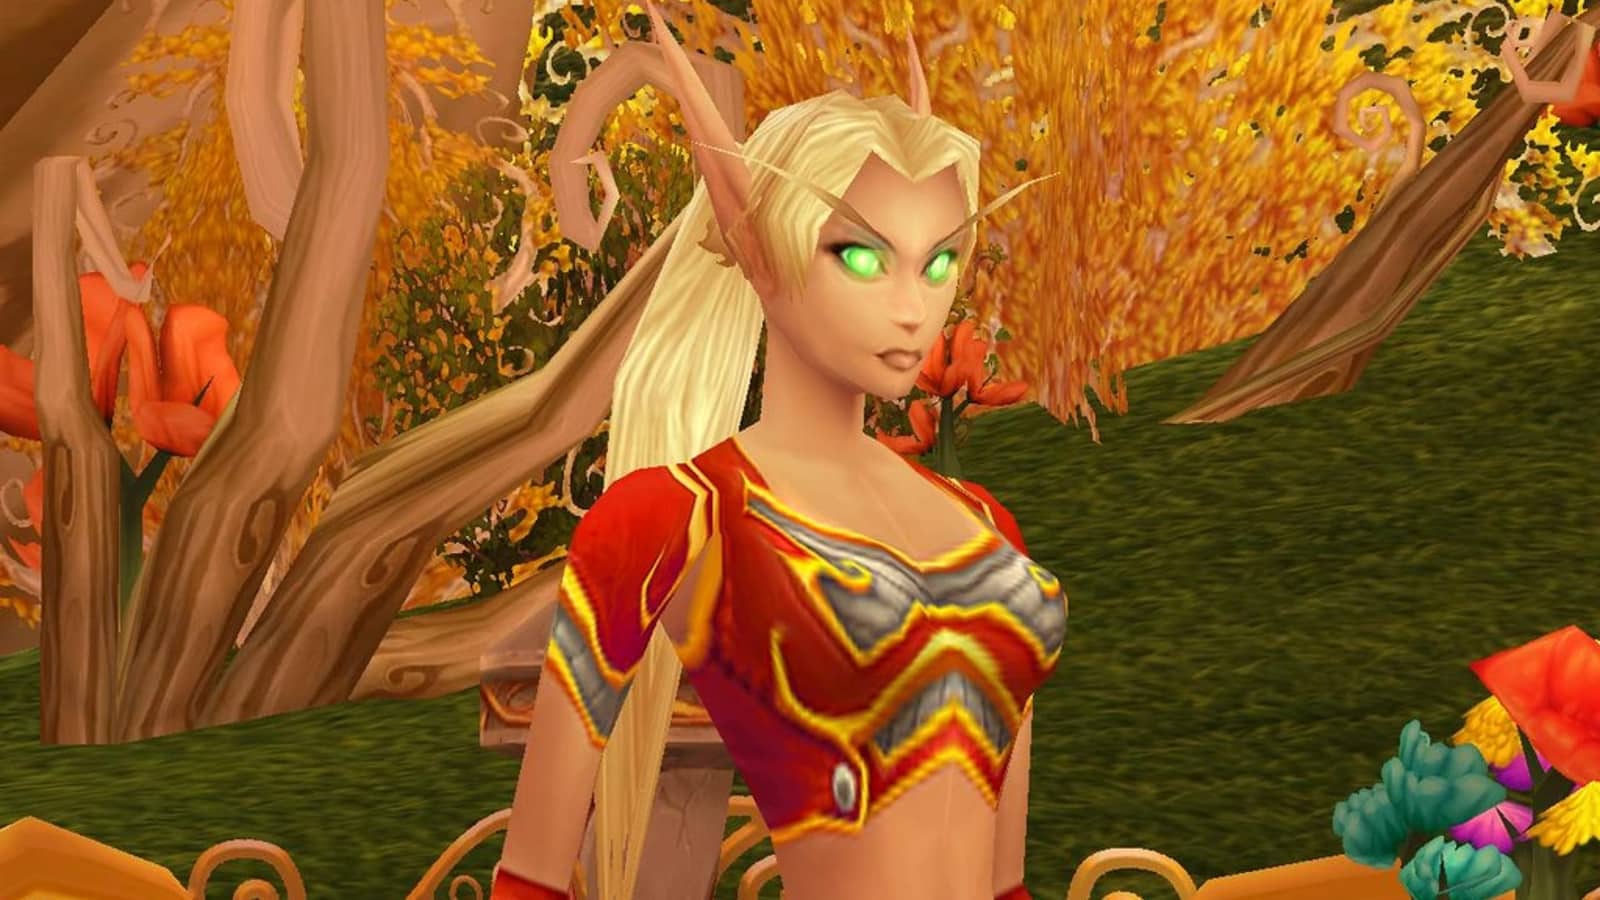 world of warcraft wow shadowlands patch 9.2.5 blood elf quest blood knight armor